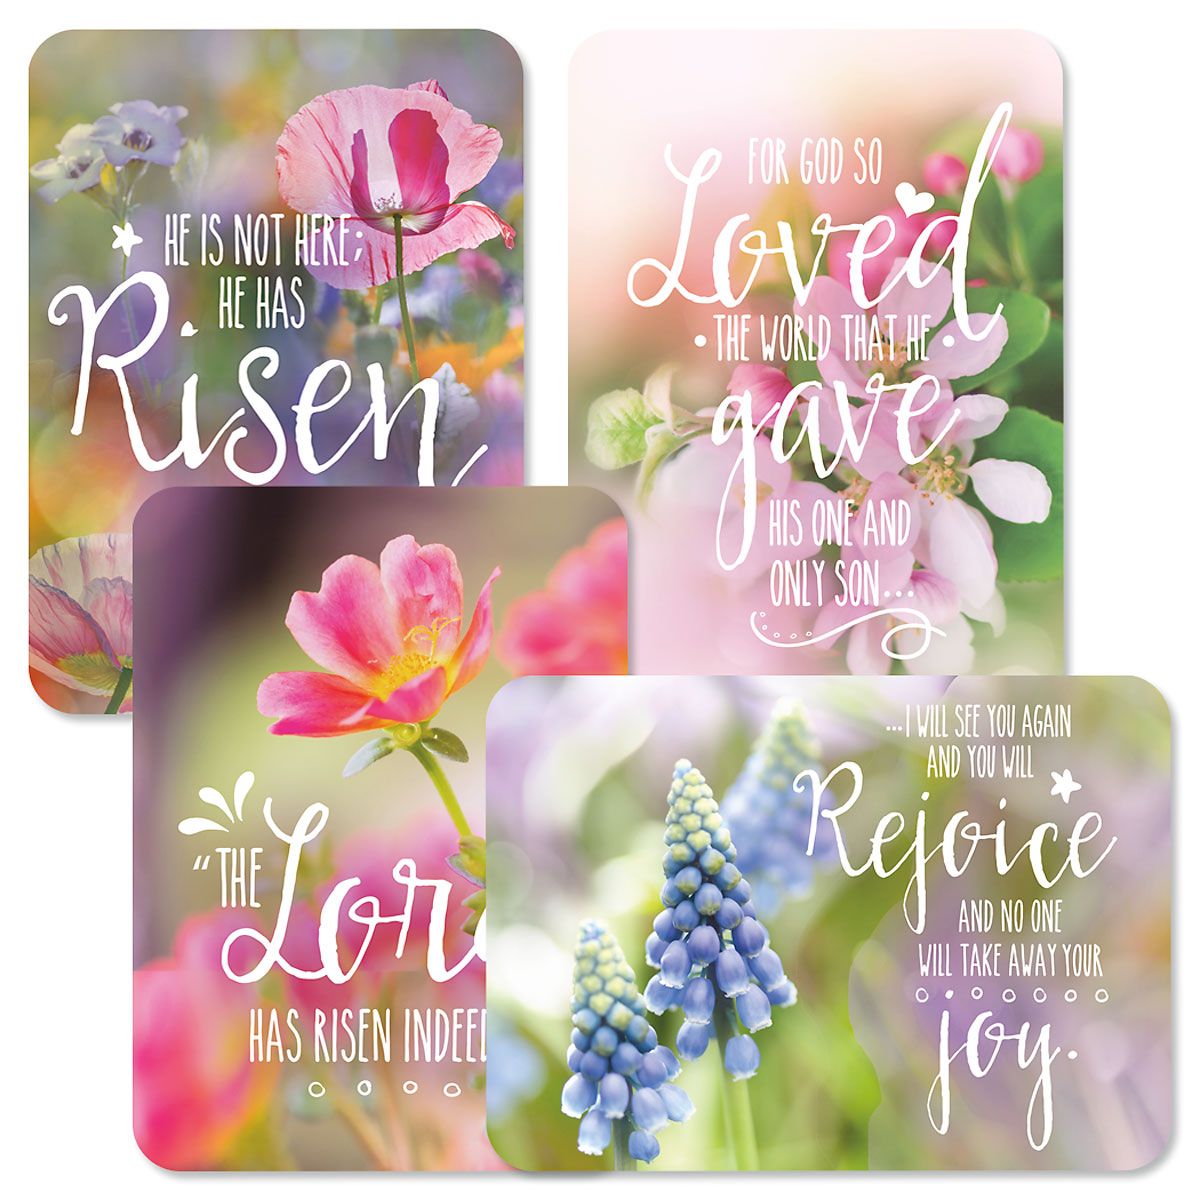 easter-sunday-happy-easter-religious-messages-50-most-wonderful-easter-religious-wish-photos